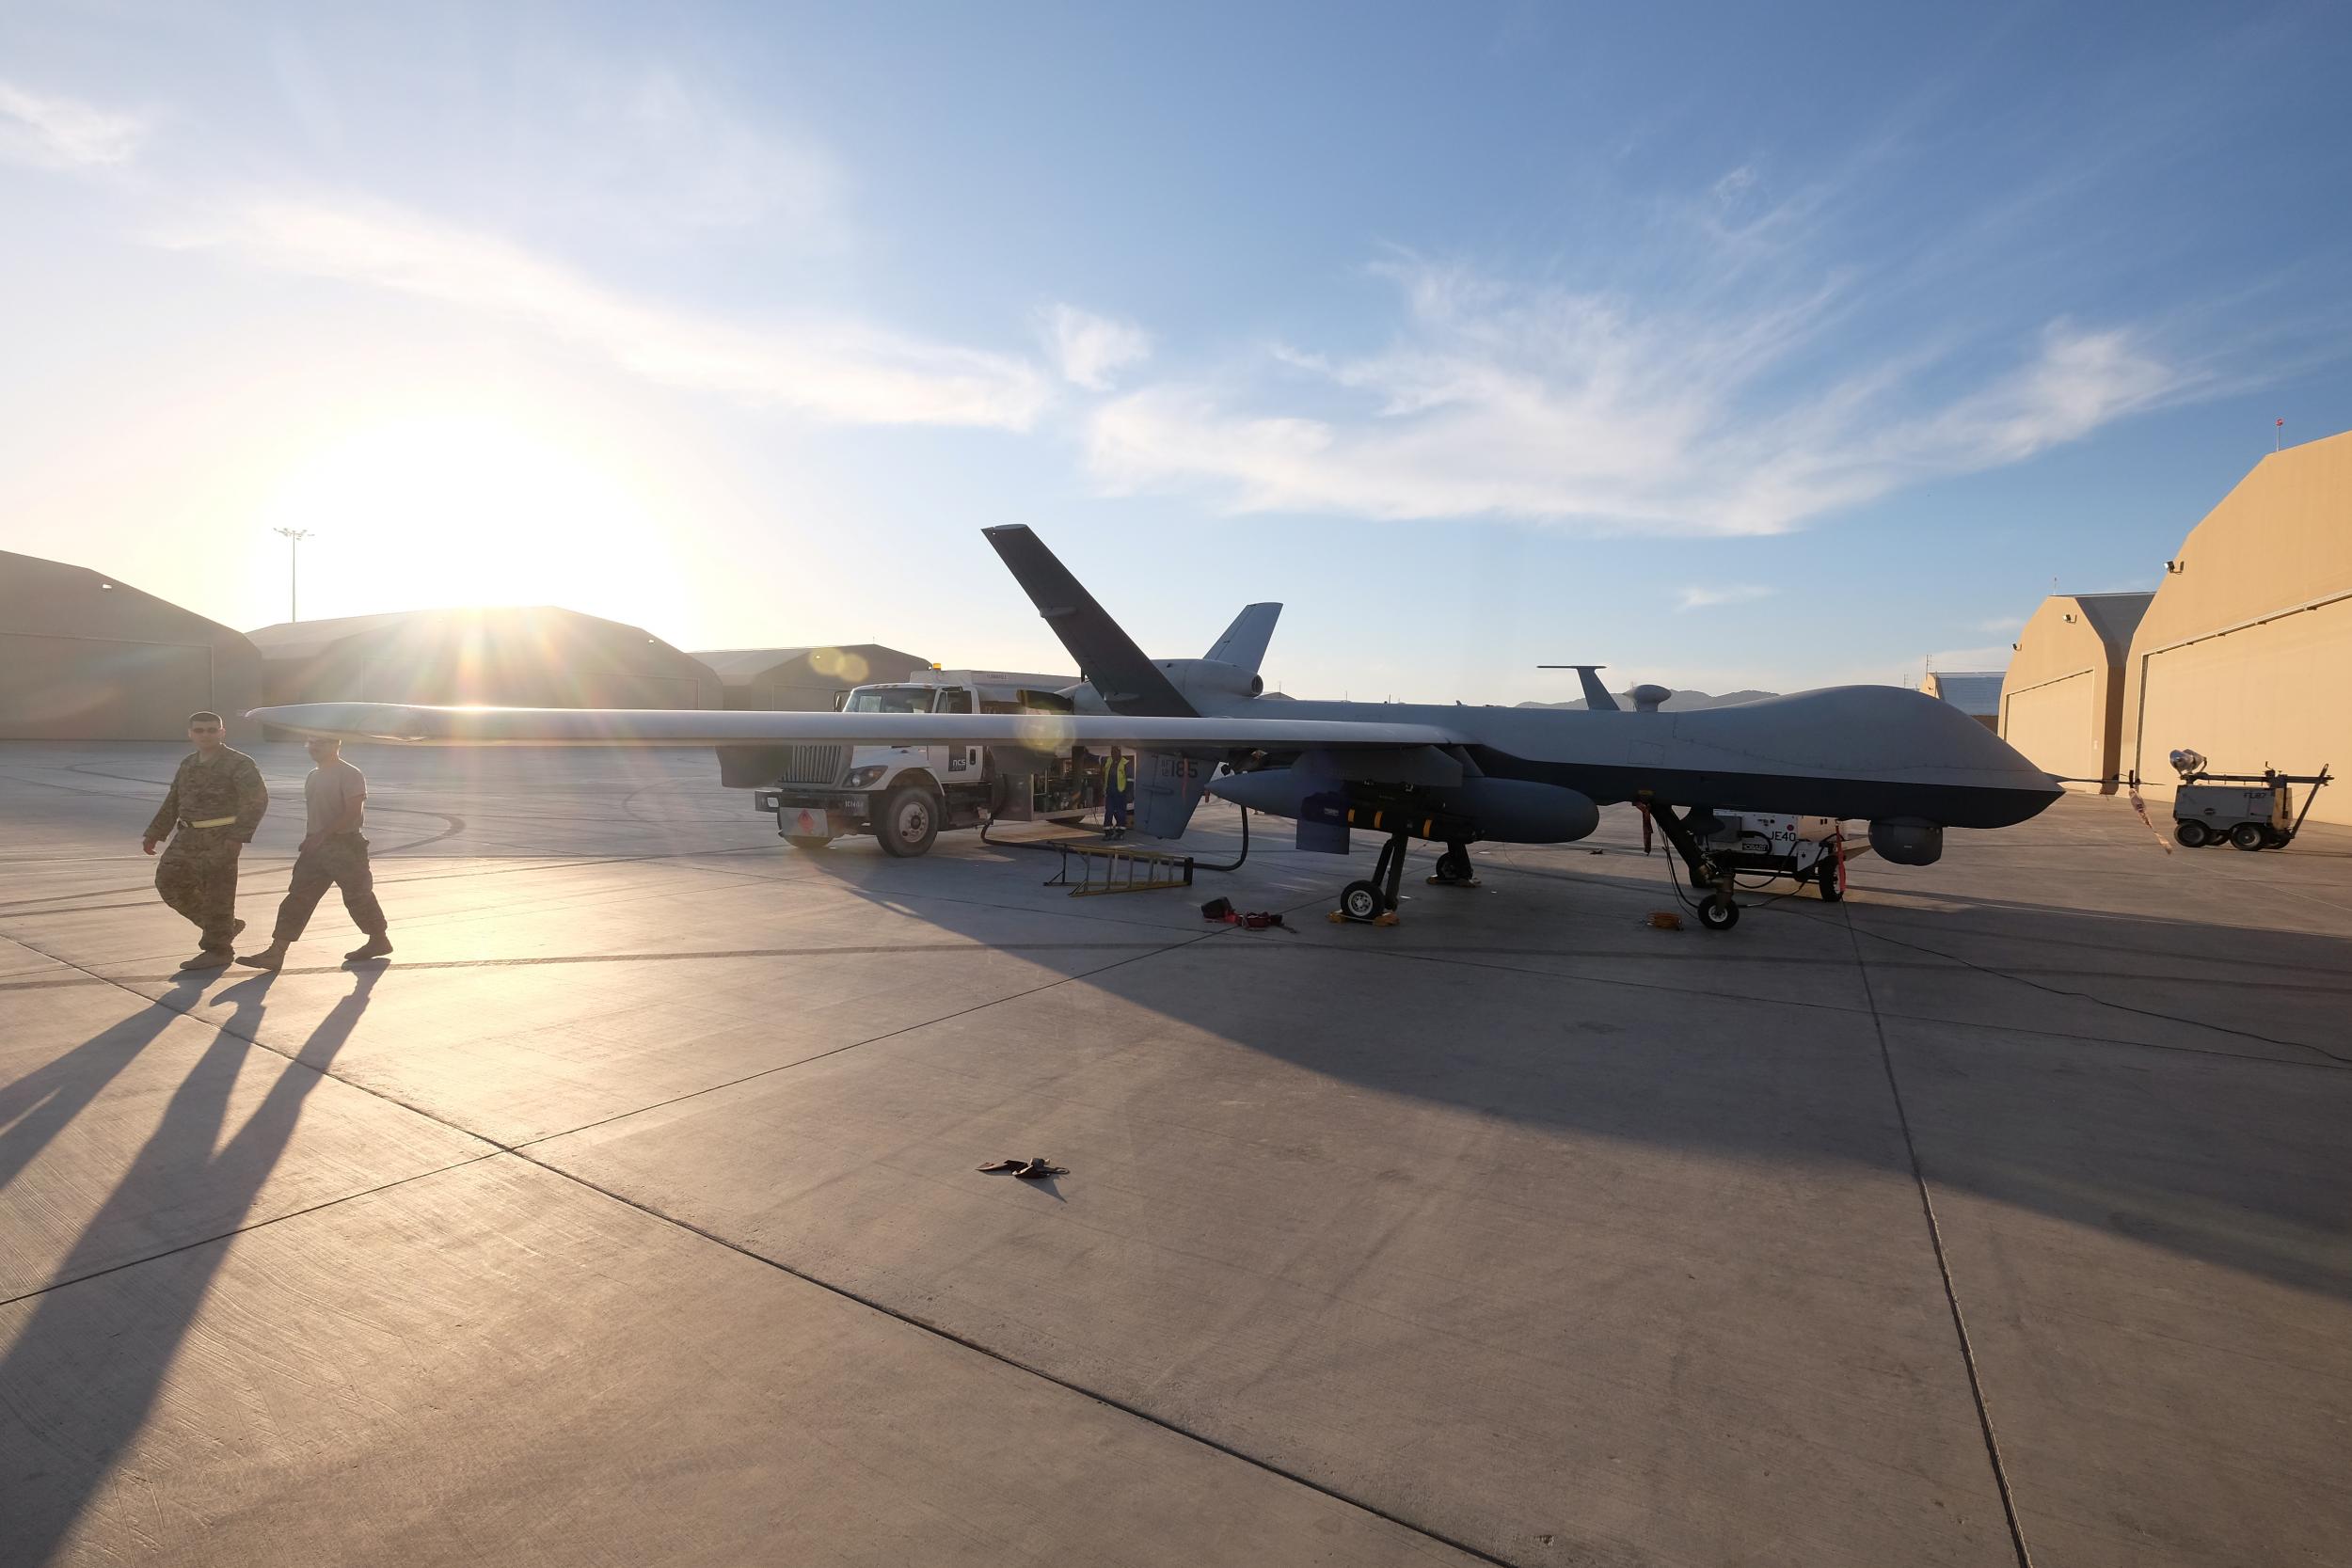 A US Air Force MQ-9 Reaper drone sits on the tarmac at Kandahar Air Field in Afghanistan